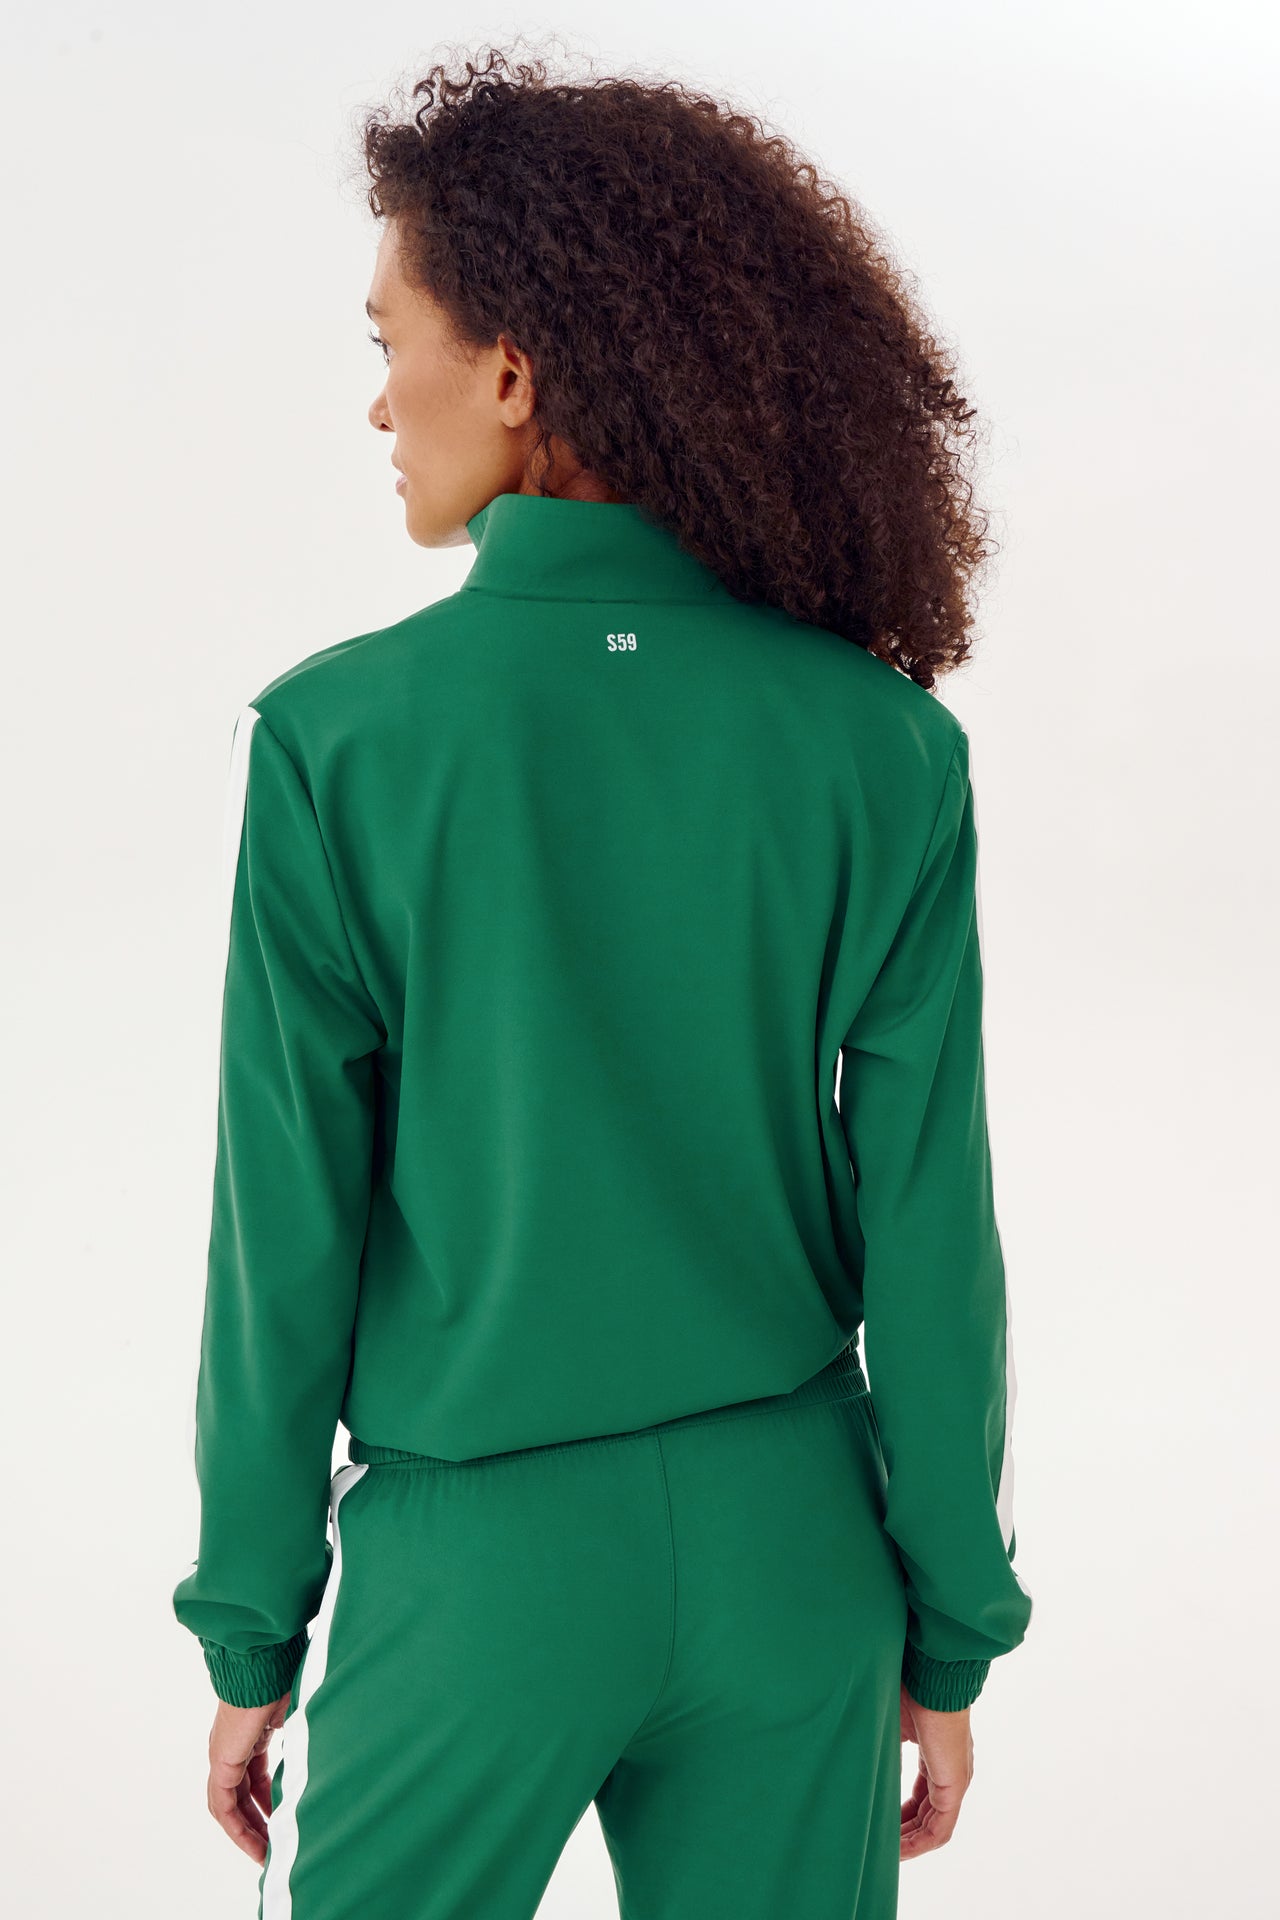 The back view of a woman warming up in a SPLITS59 Max Rigor Track Jacket in Arugula/White.